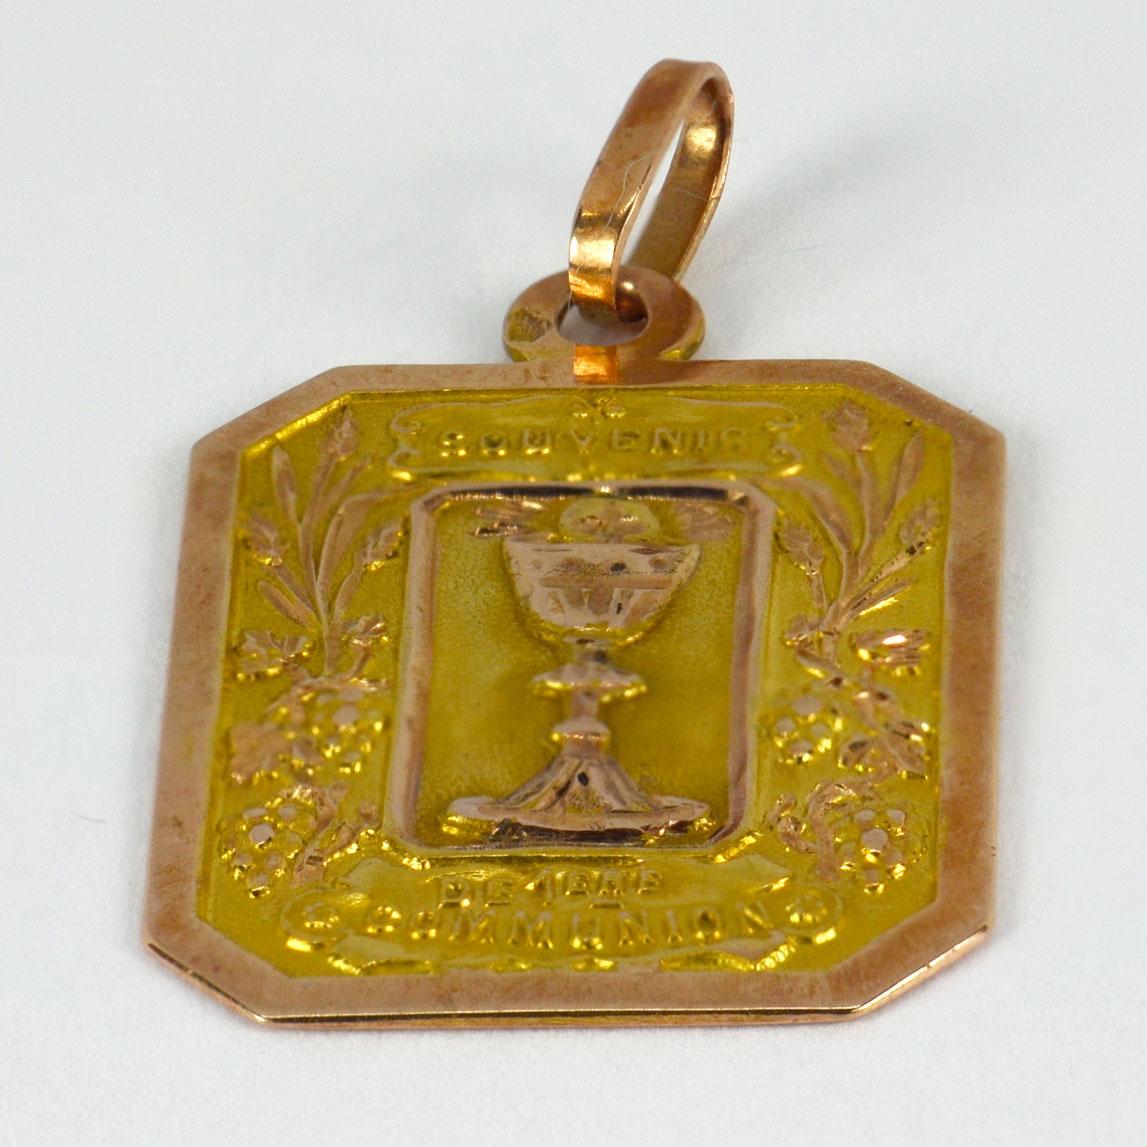 An 18 karat (18K) yellow and rose gold charm pendant depicting a goblet, engraved First Communion. Stamped with the eagle’s head for French manufacture and 18 karat gold.

Dimensions: 2.8 x 1.8 x 0.1 cm (not including jump ring)
Weight: 3.38 grams 
